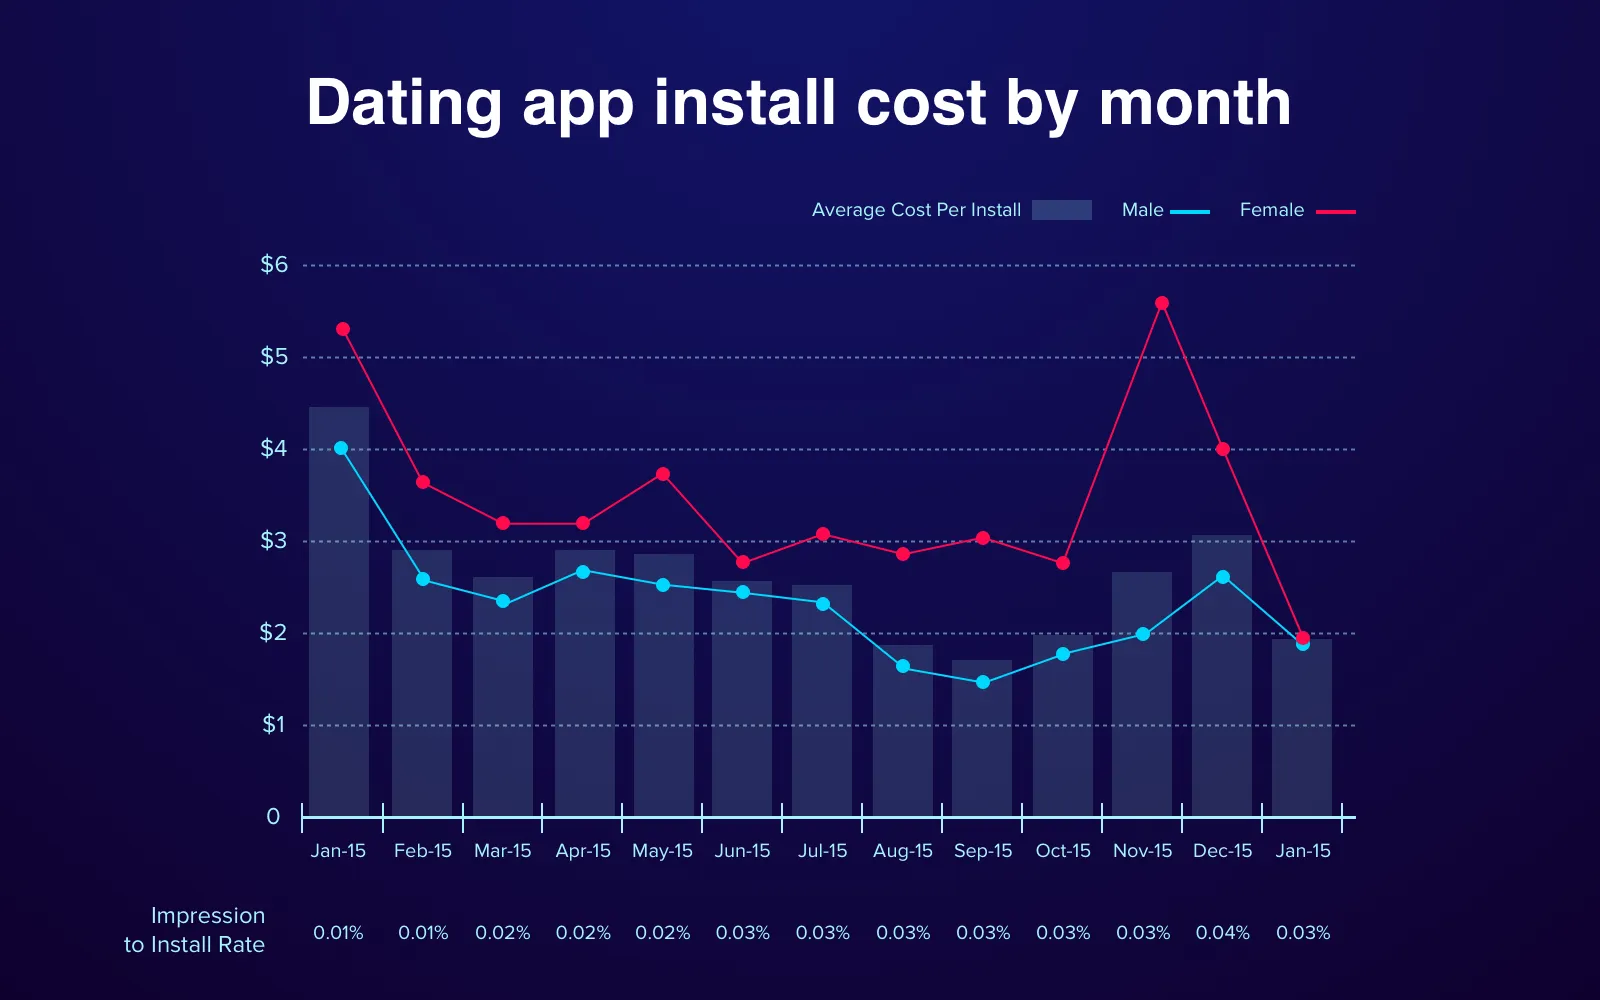 Marketing budget for an app: example based on dating app's cost per install